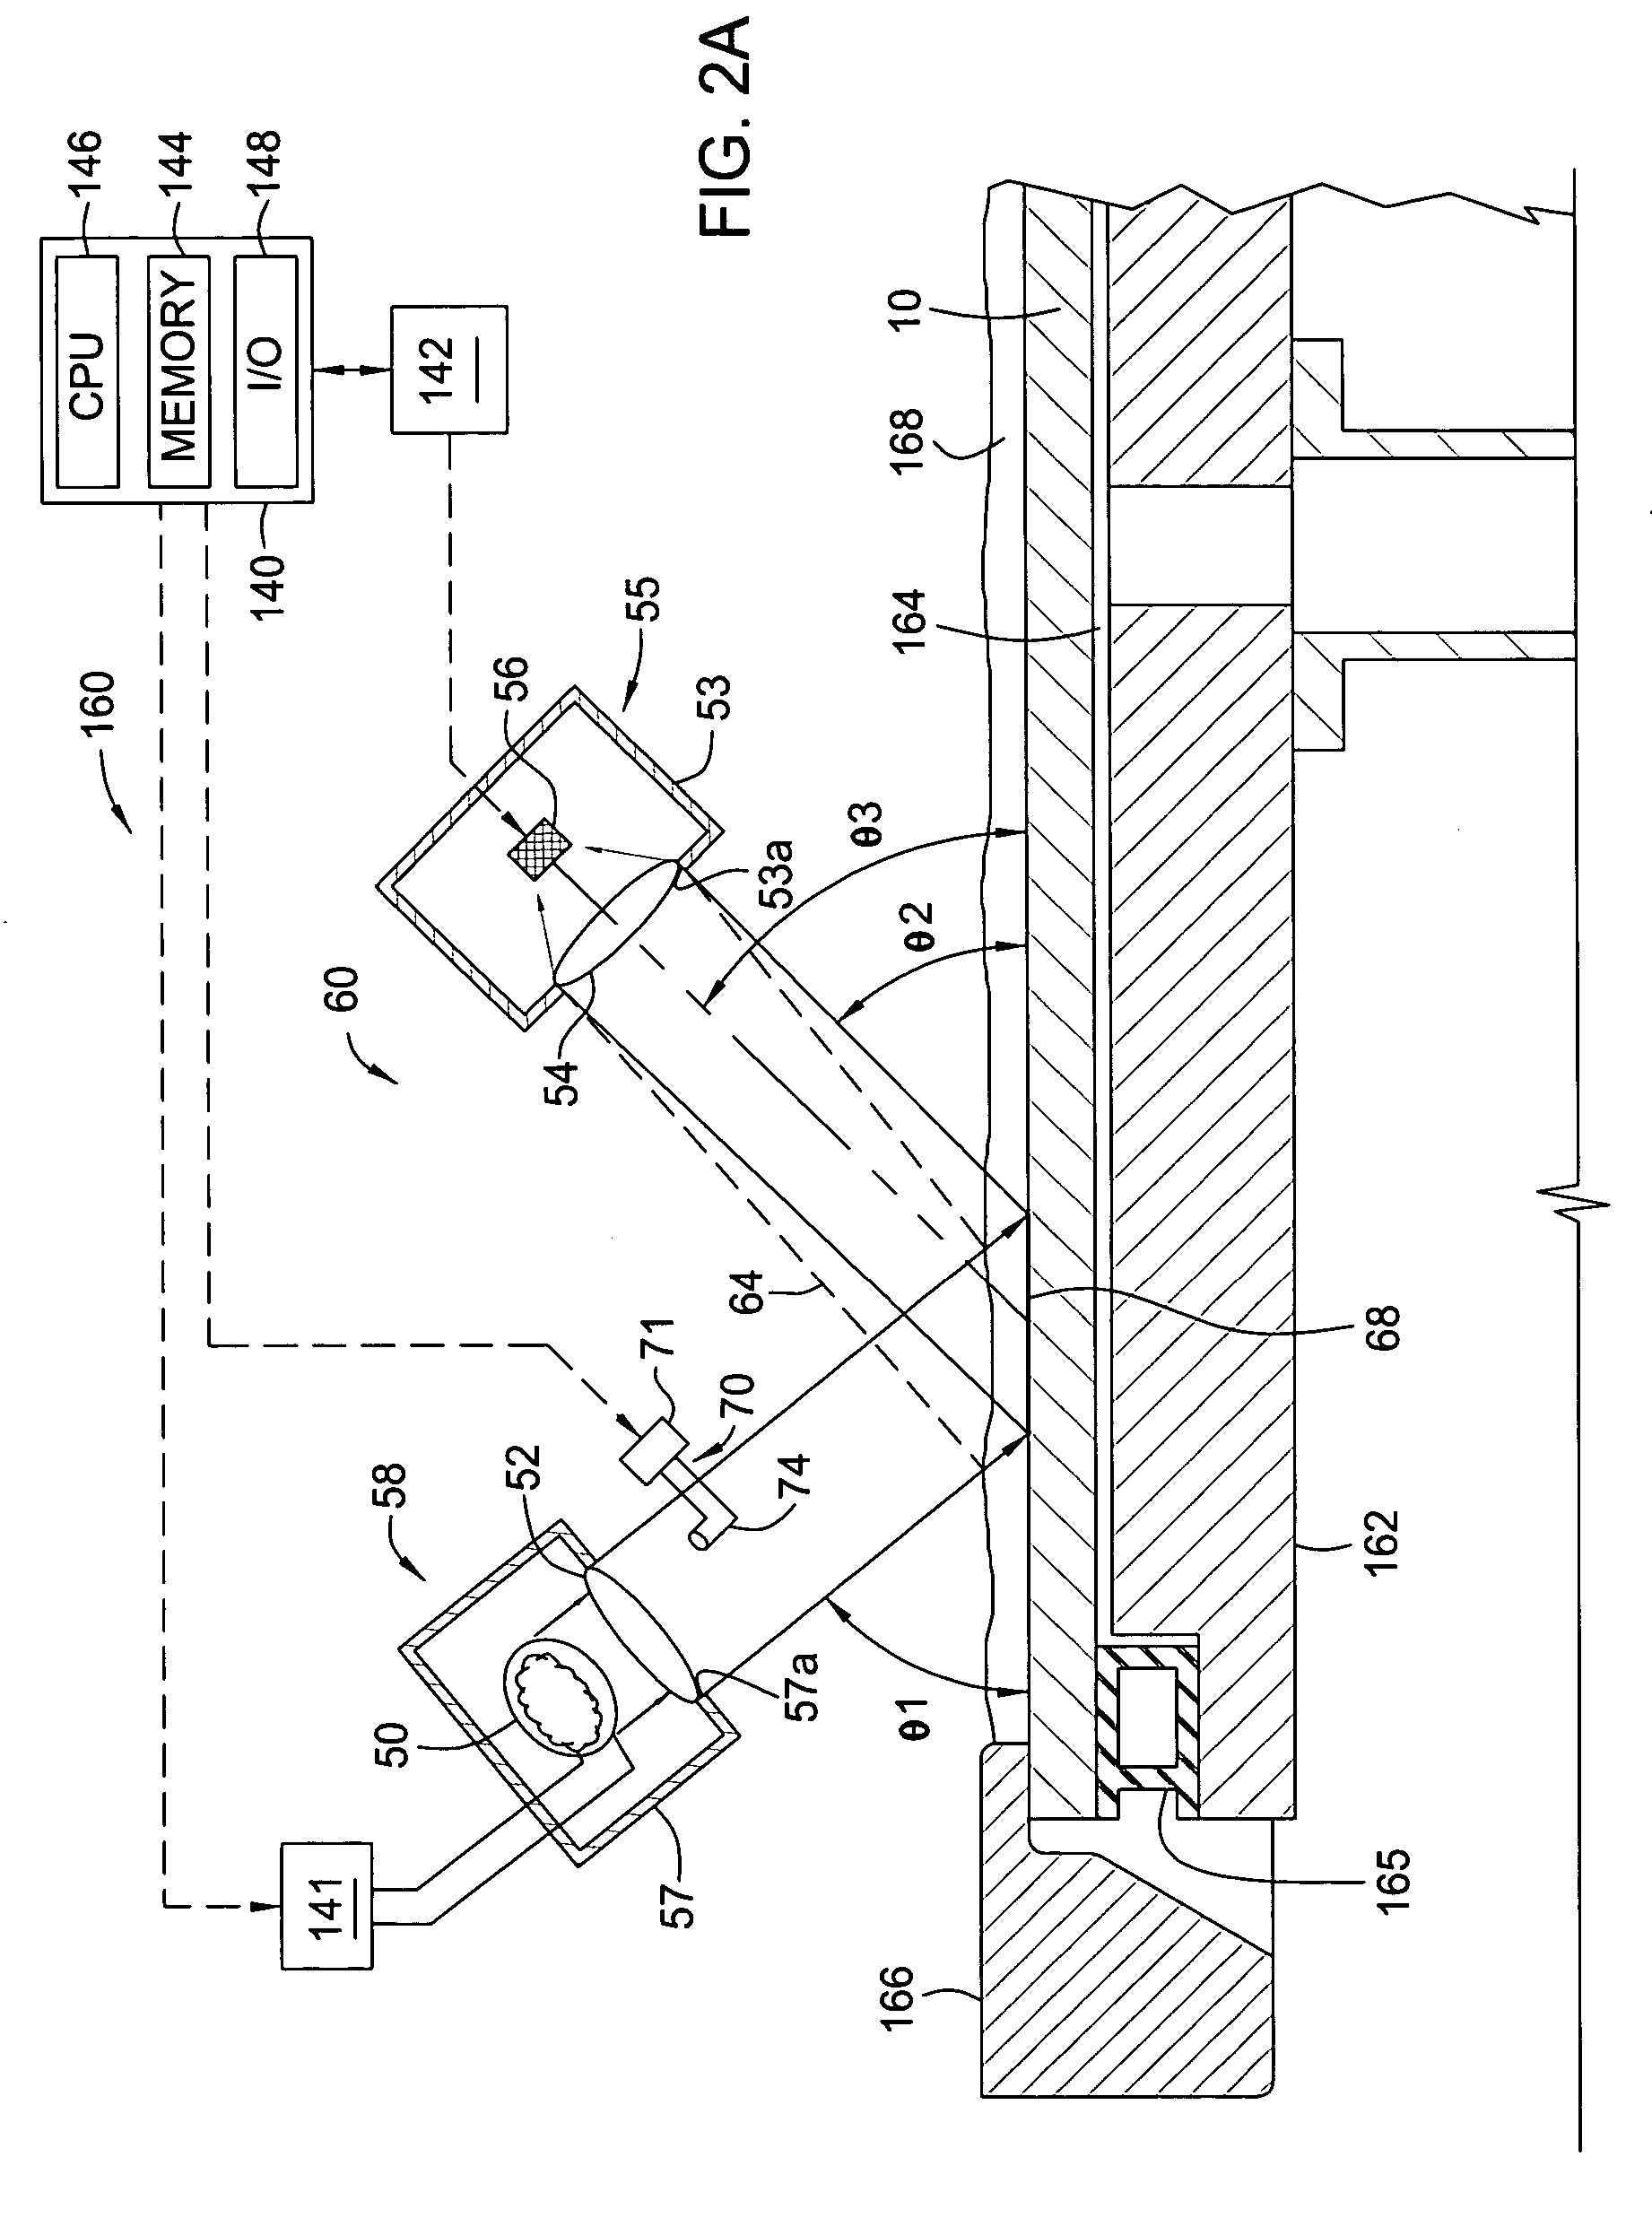 Apparatus and method of detecting the electroless deposition endpoint